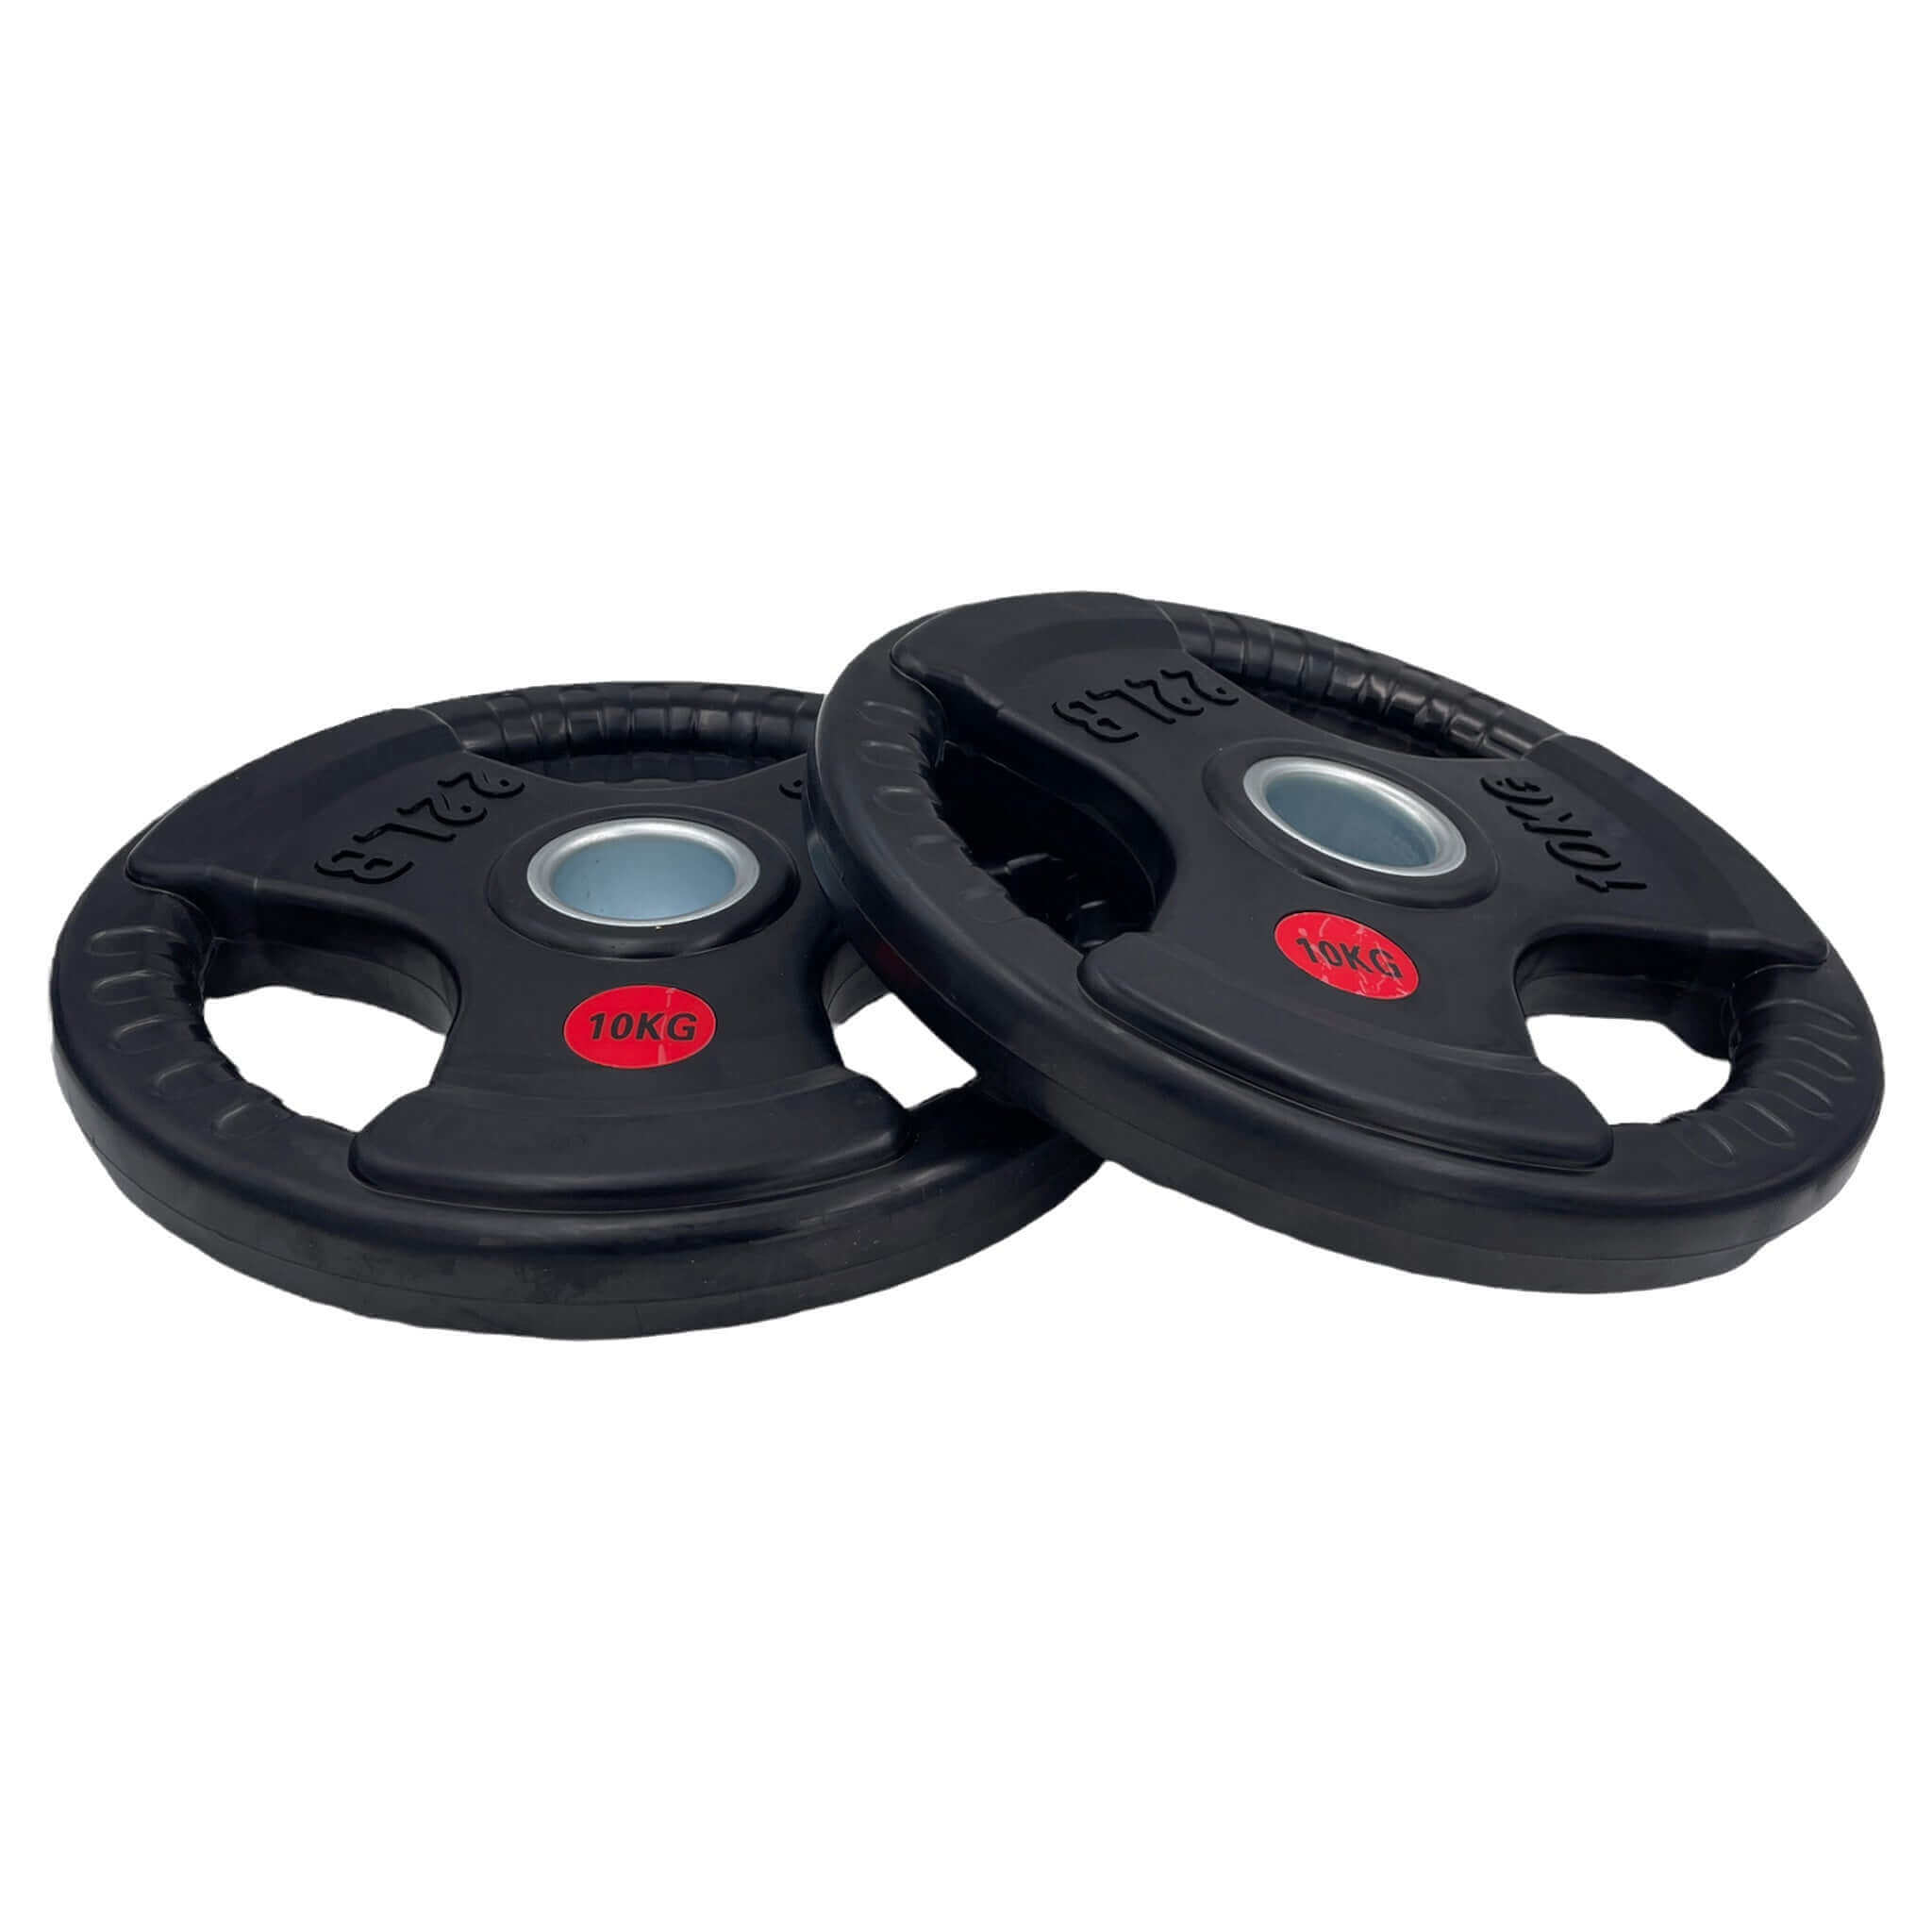 70kg Rubber Coated Type-O Tri-Grip Weight Plates and Barbell Bundles | Tri Grip Rubber Plates | INSOURCE